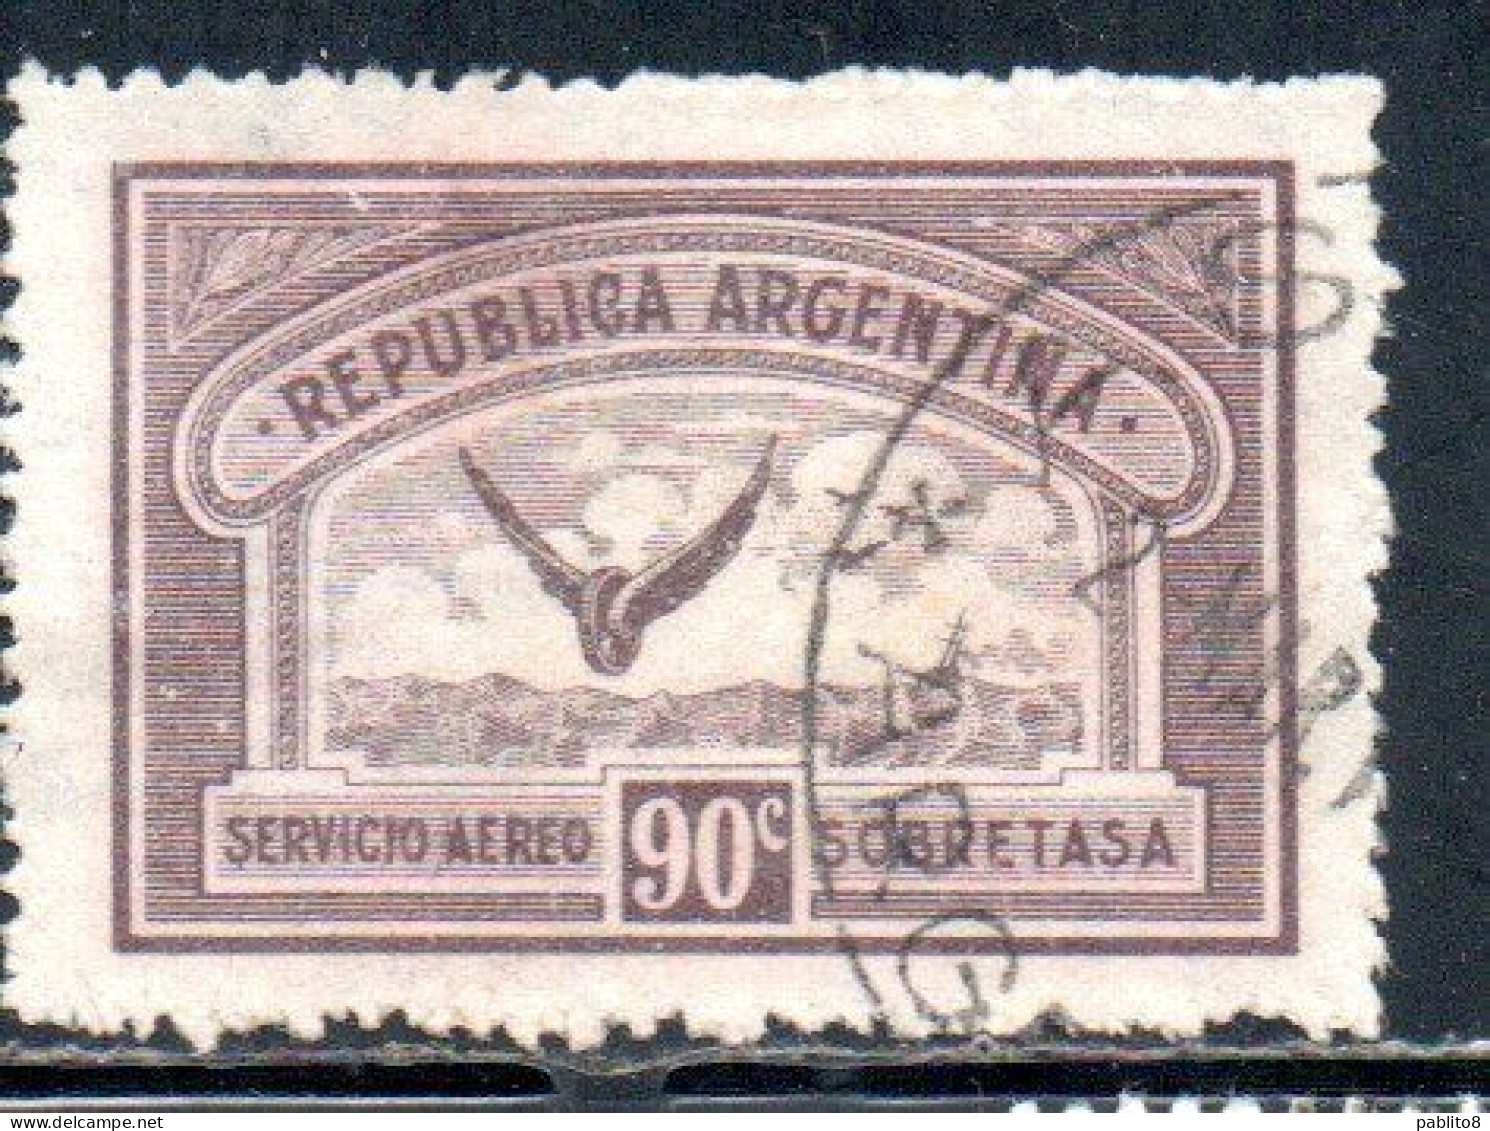 ARGENTINA 1928 AIR POST MAIL CORREO AEREO AIRMAIL WINGS CROSS THE SEA 90c USED USADO OBLITERE' - Airmail